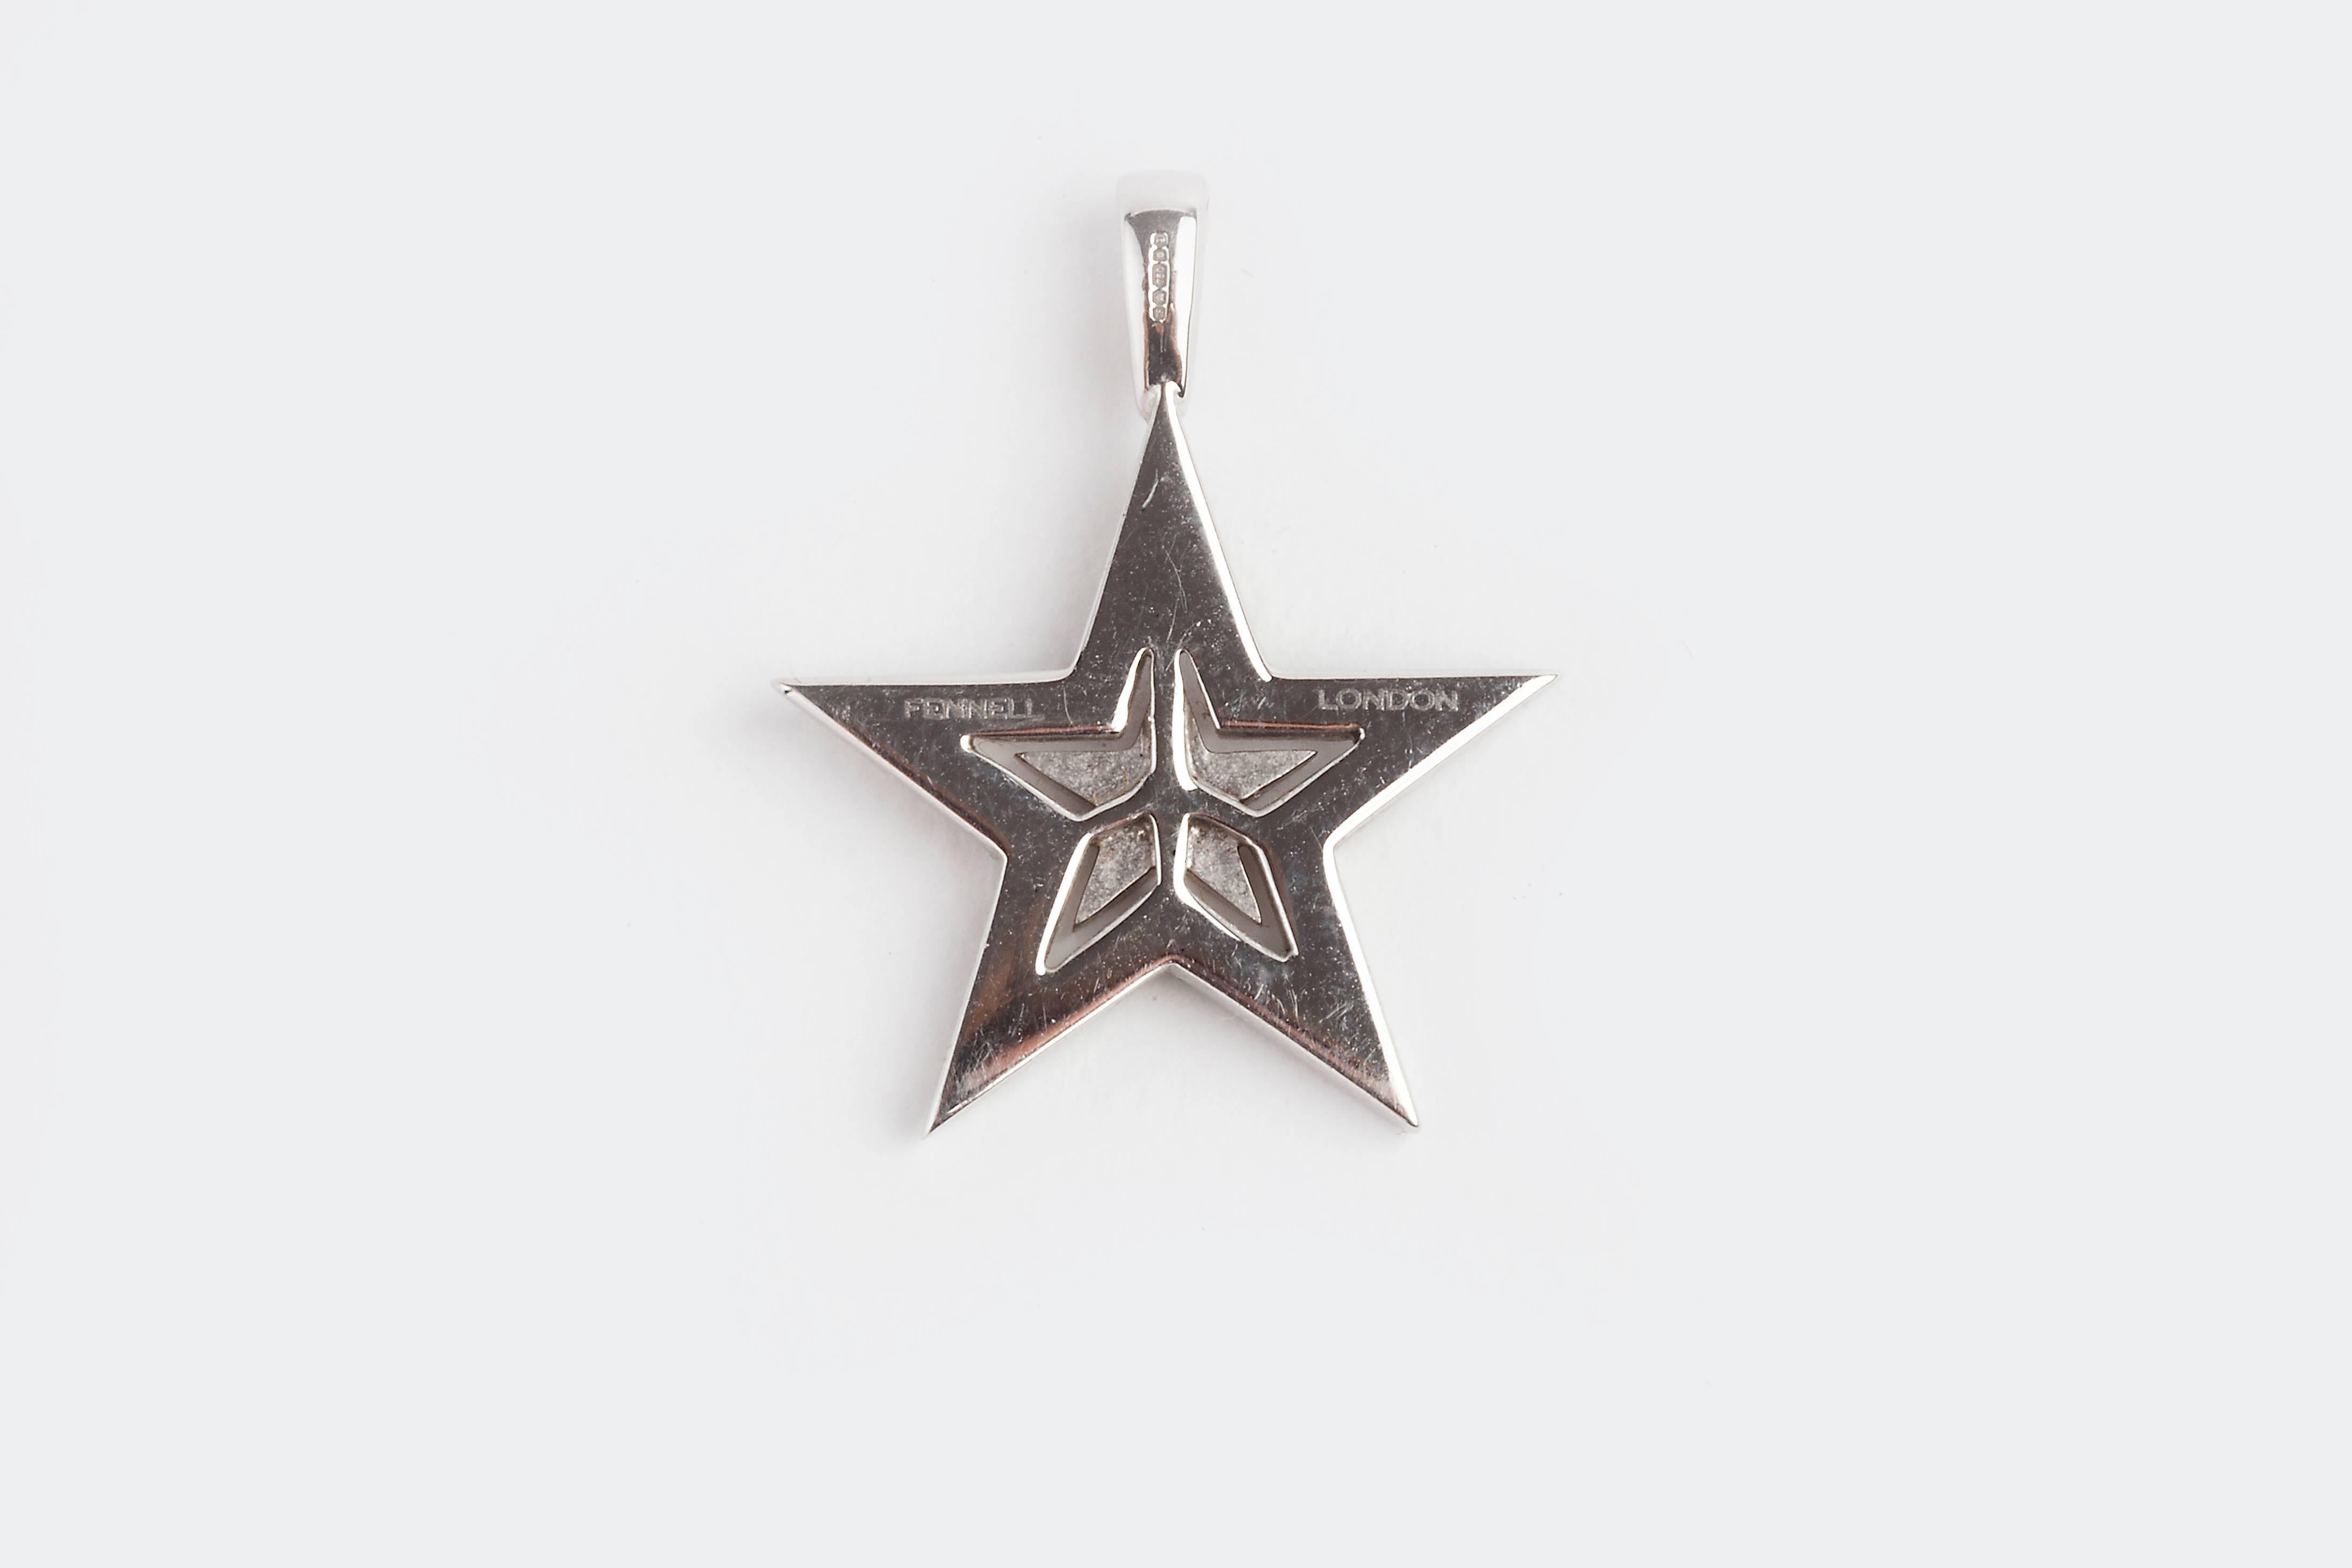 A diamond star pendant by Theo Fennell, late 20th Century, hallmarked 'Theo Fenell